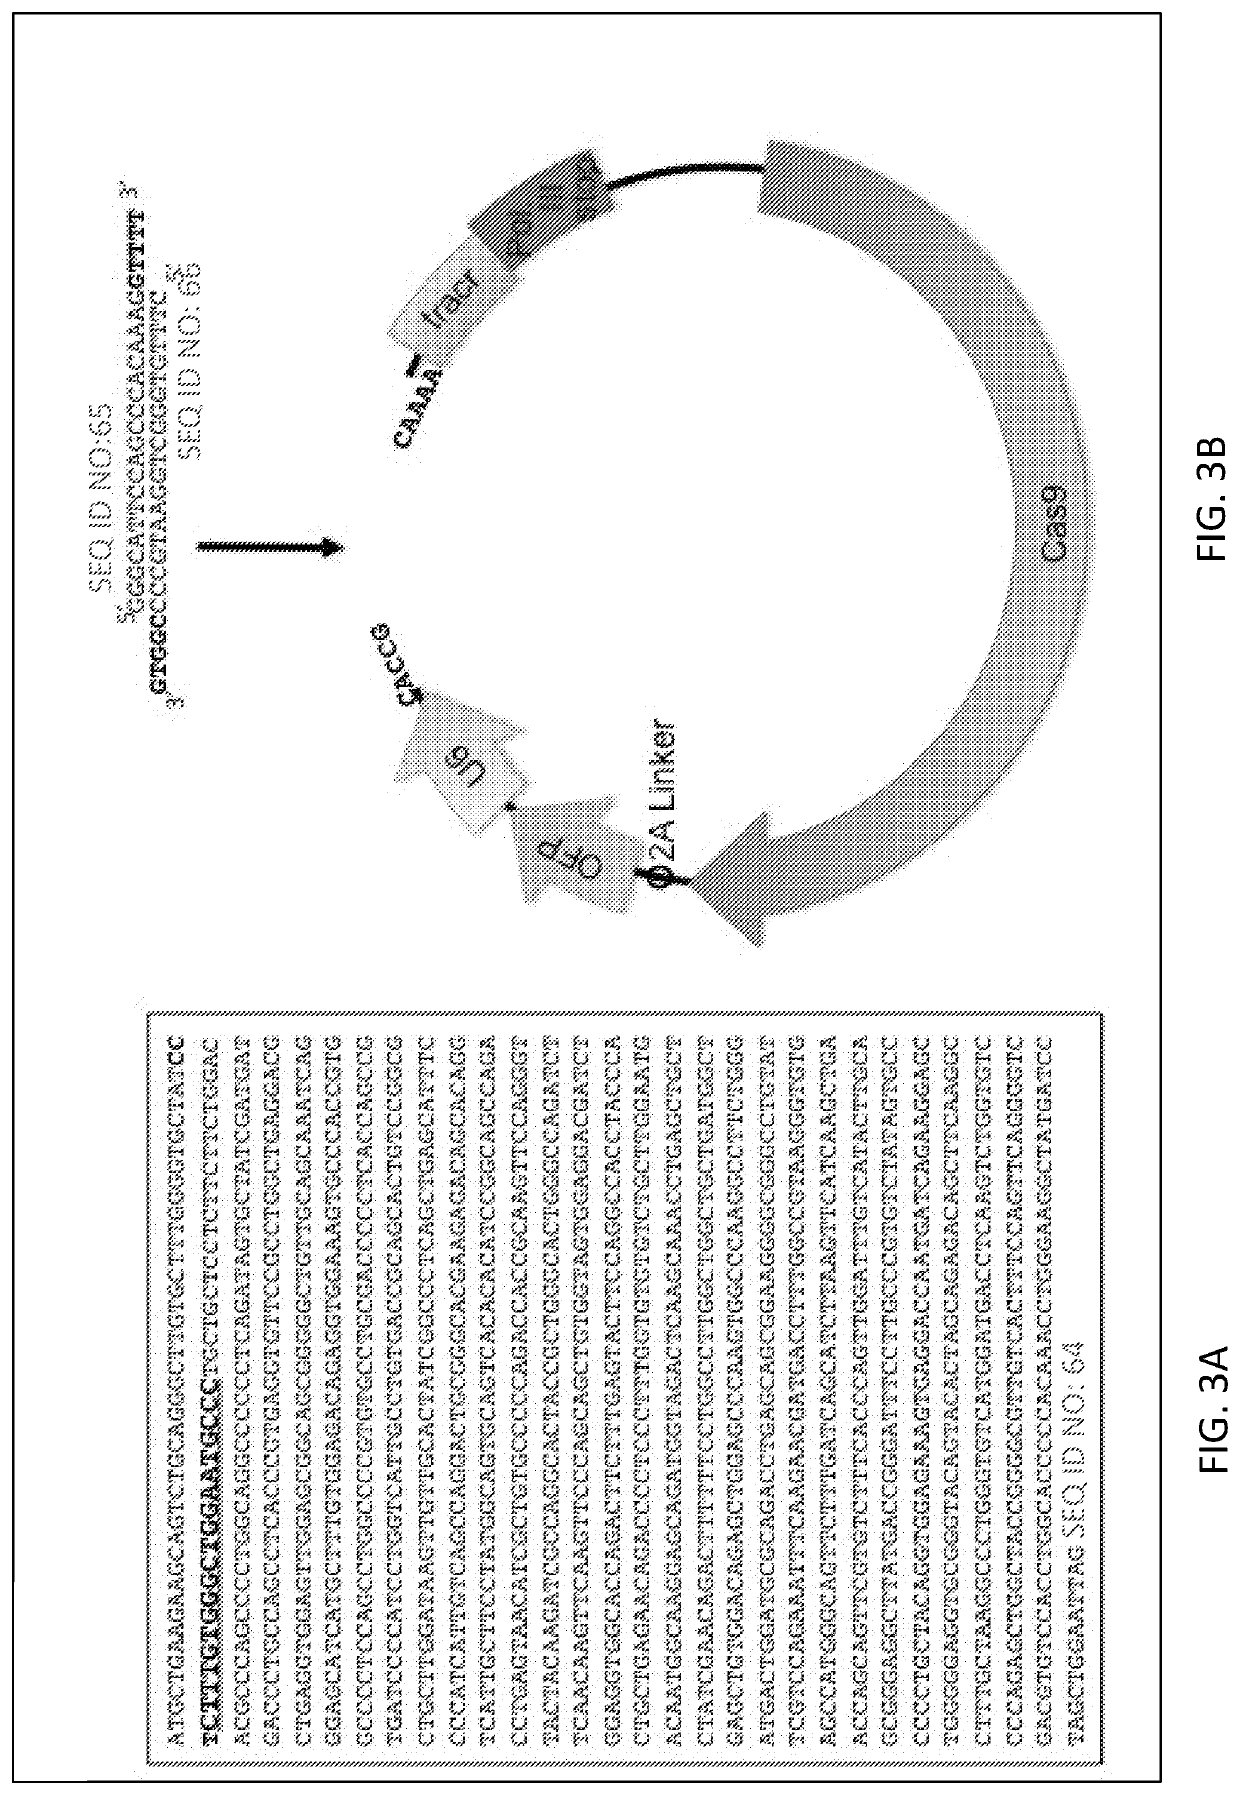 MGAT1-Deficient Cells for Production of Vaccines and Biopharmaceutical Products